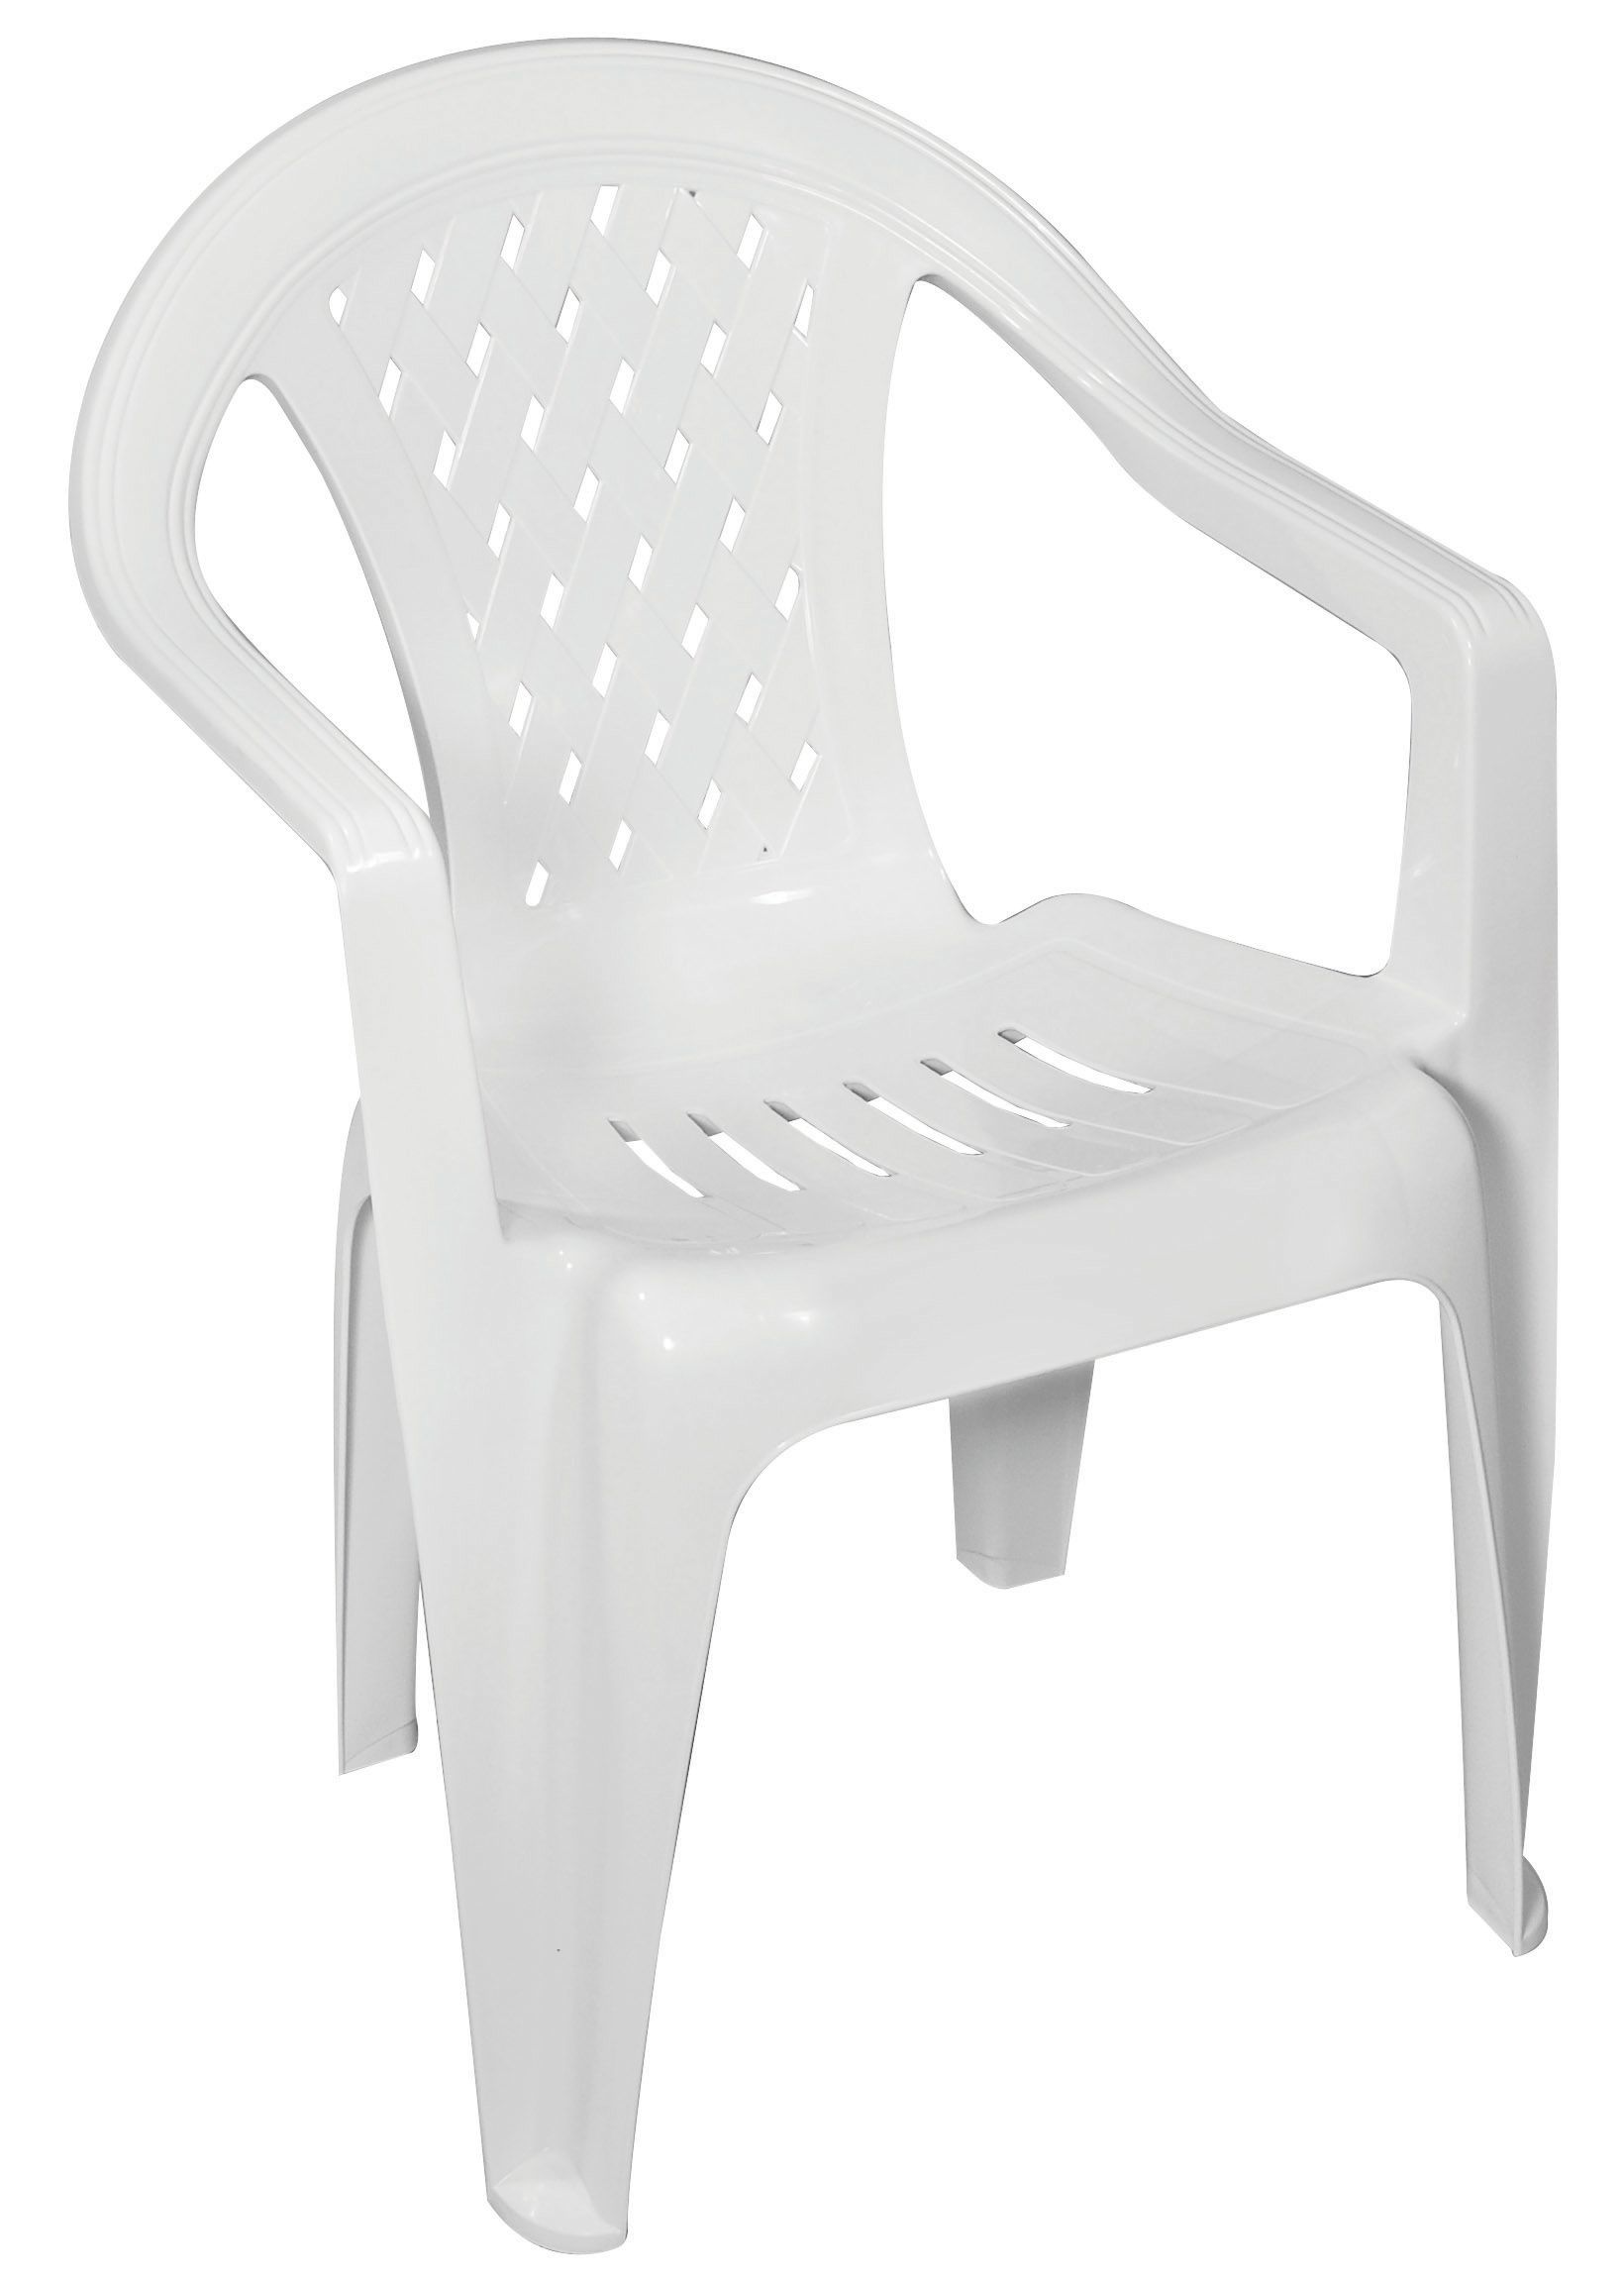 Plastic Outdoor Chairs Kmart Plastic Adirondack Chairs Are Totally Carefree Exactly What Outdoor Lounging Is About Girlycop